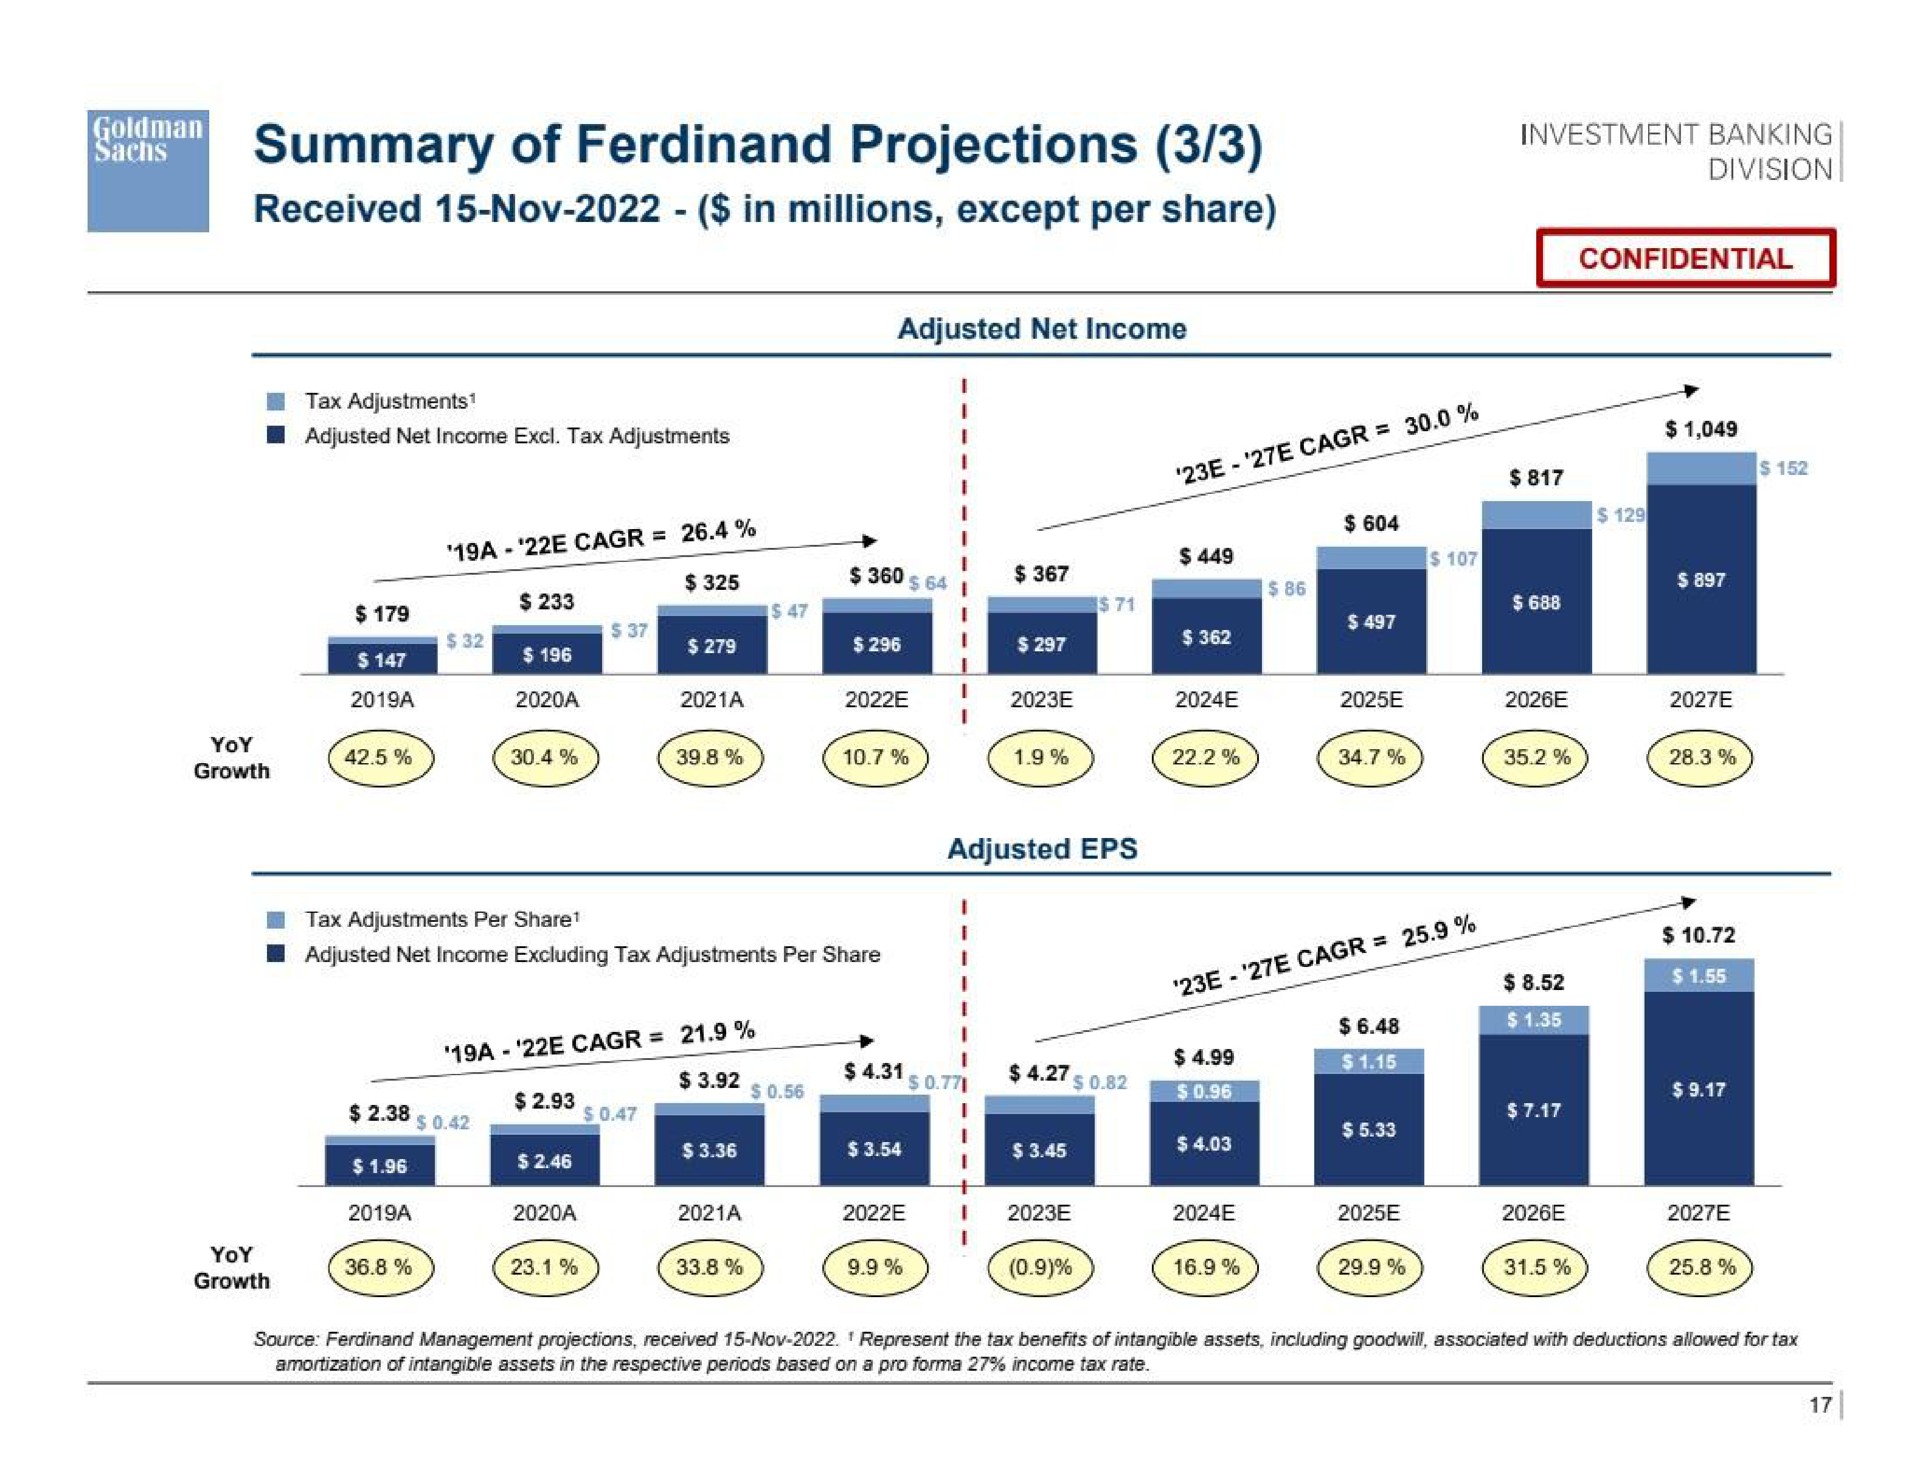 summary of projections ion | Goldman Sachs